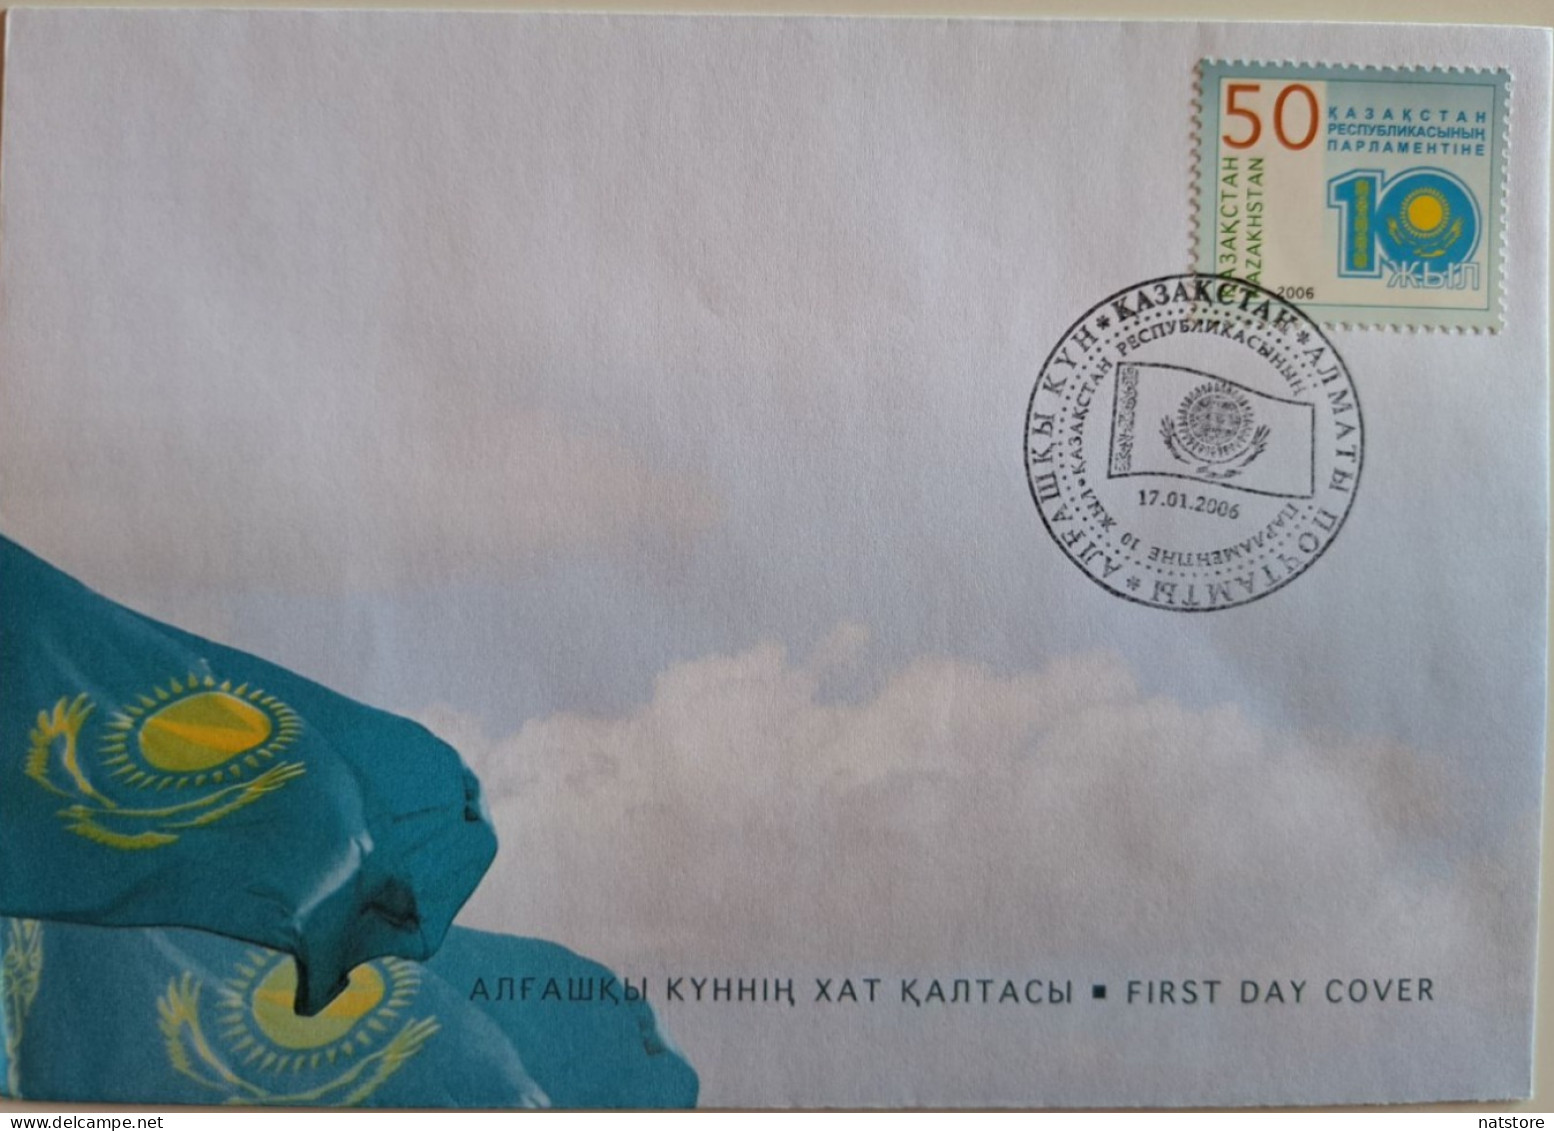 2006..KAZAKHSTAN...FDC WITH  STAMP...NEW..The 10th Anniversary Of Parliament Of Republic Of Kazakhstan..RARE!!! - Buste